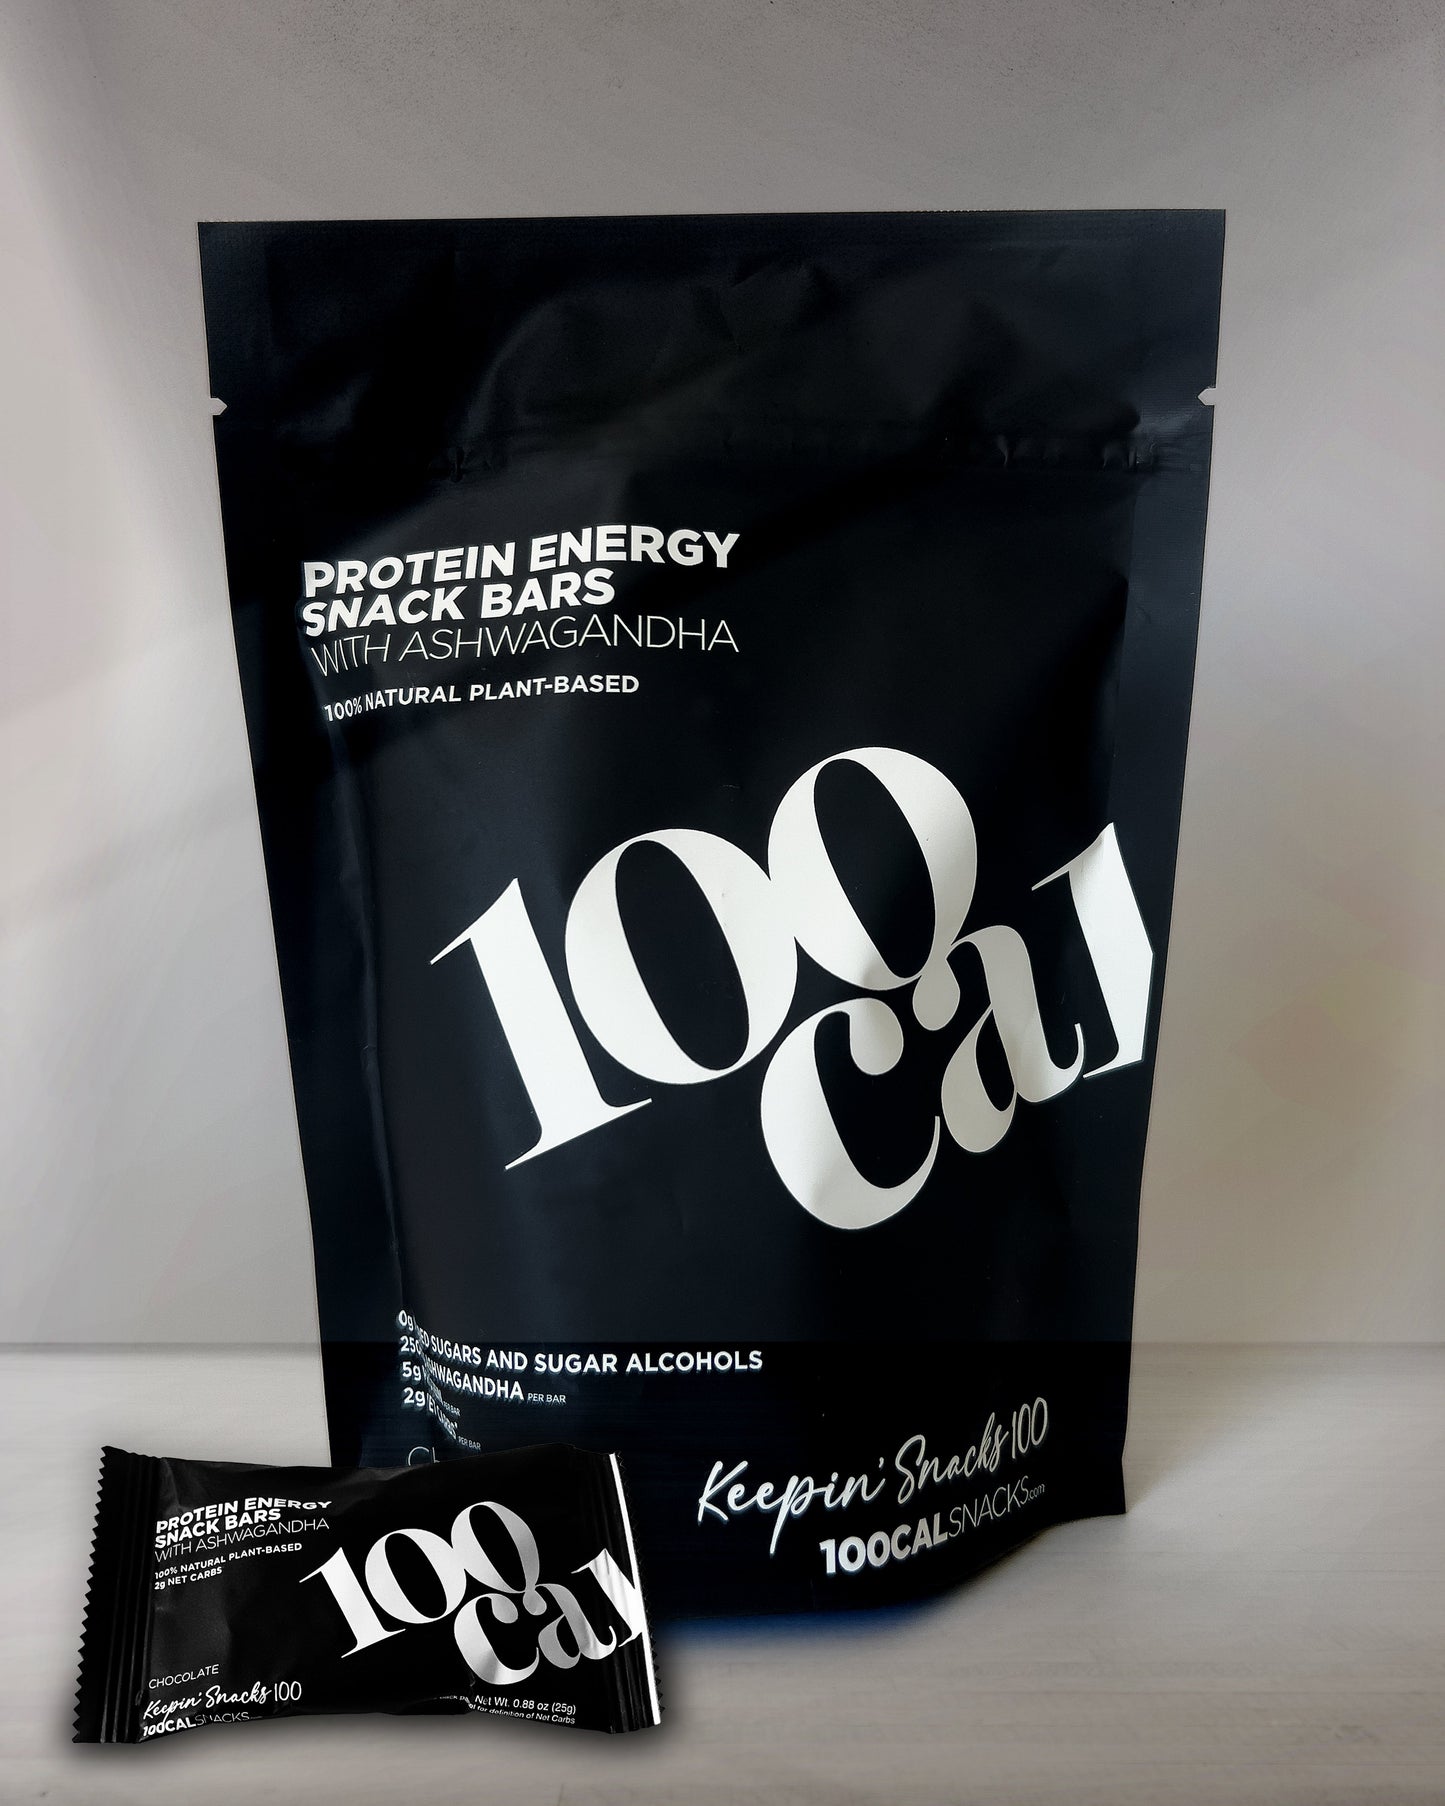 Protein Energy Snack Bars Pouch 8 Bars Black White 100 Calories